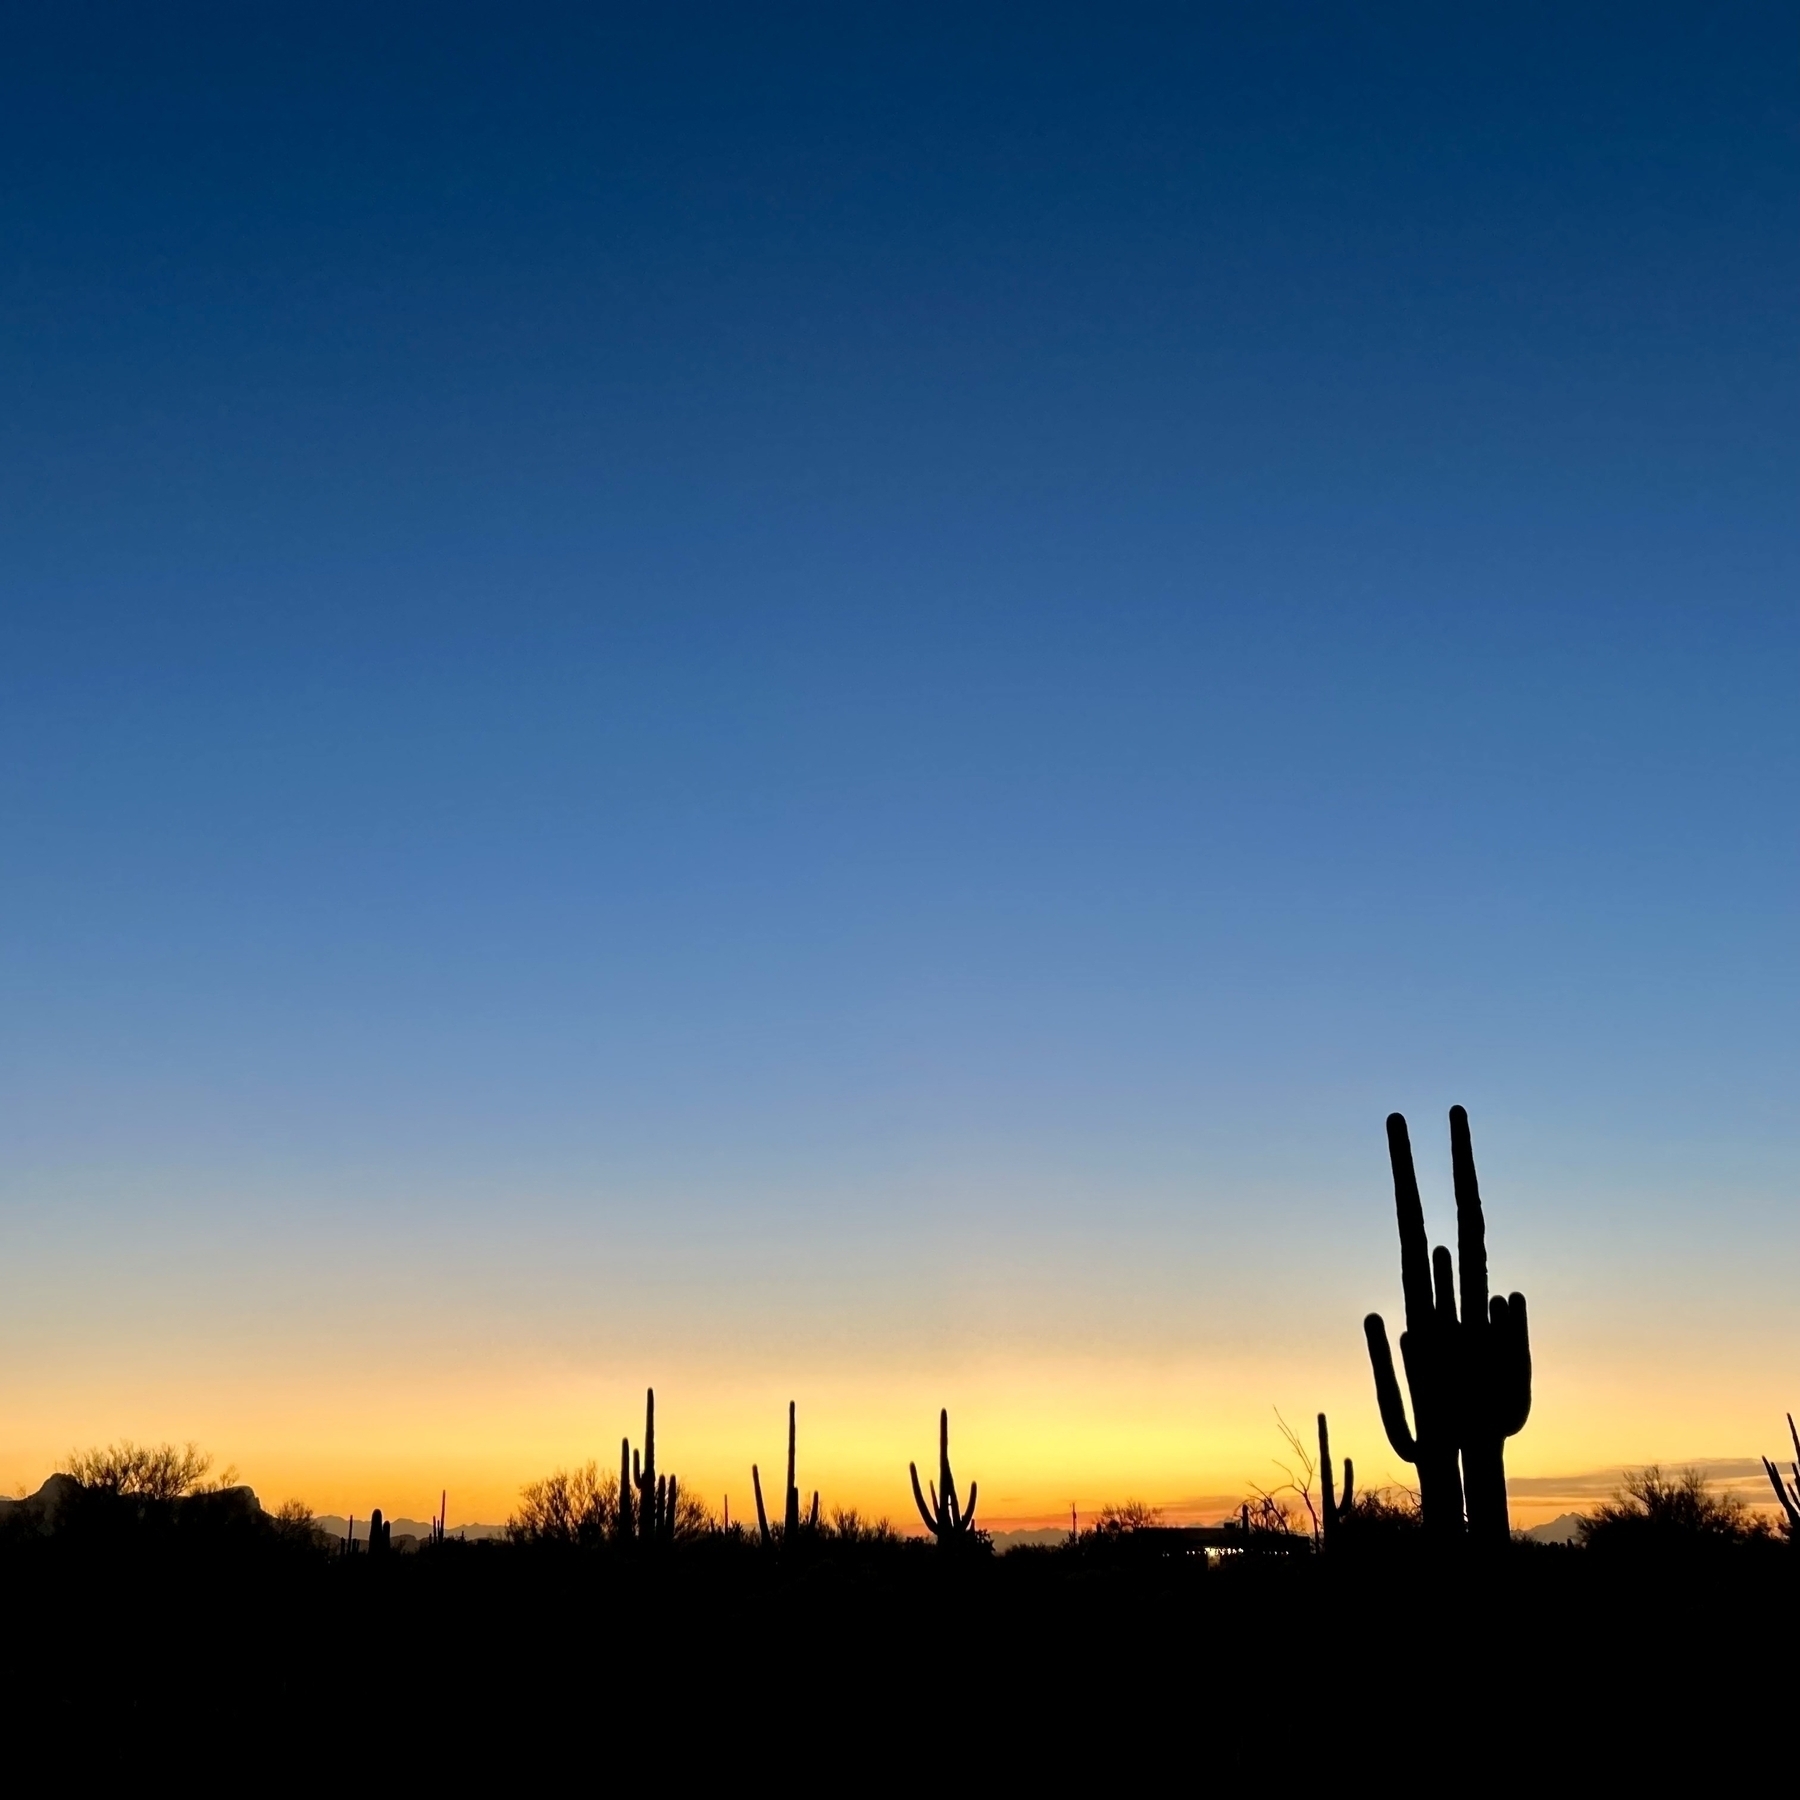 A sunset with a blue sky and a cactus in the foreground.